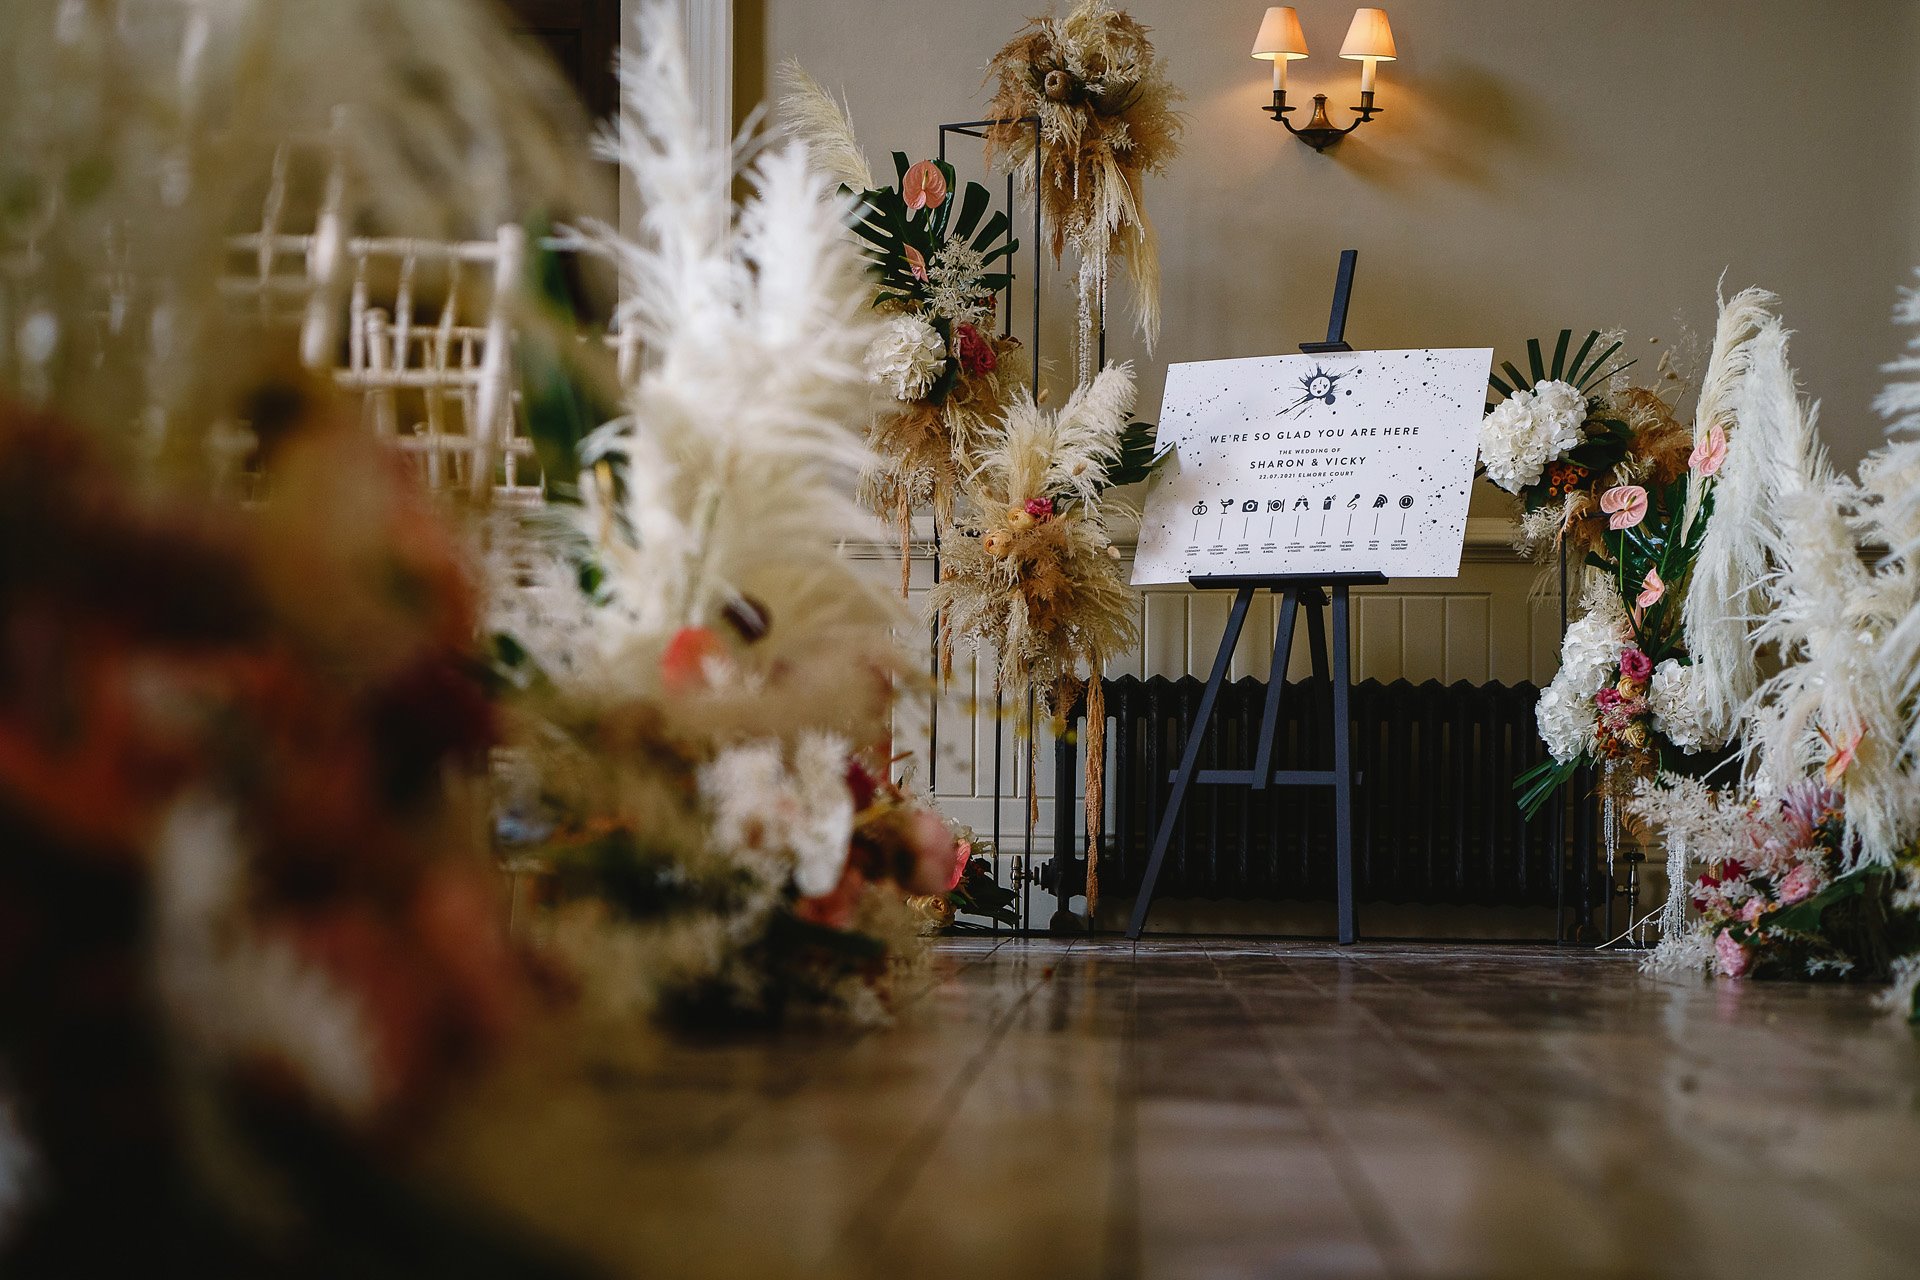 Pampas grass wedding aisle decor for a lesbian wedding at elmore court by Studio Sorores